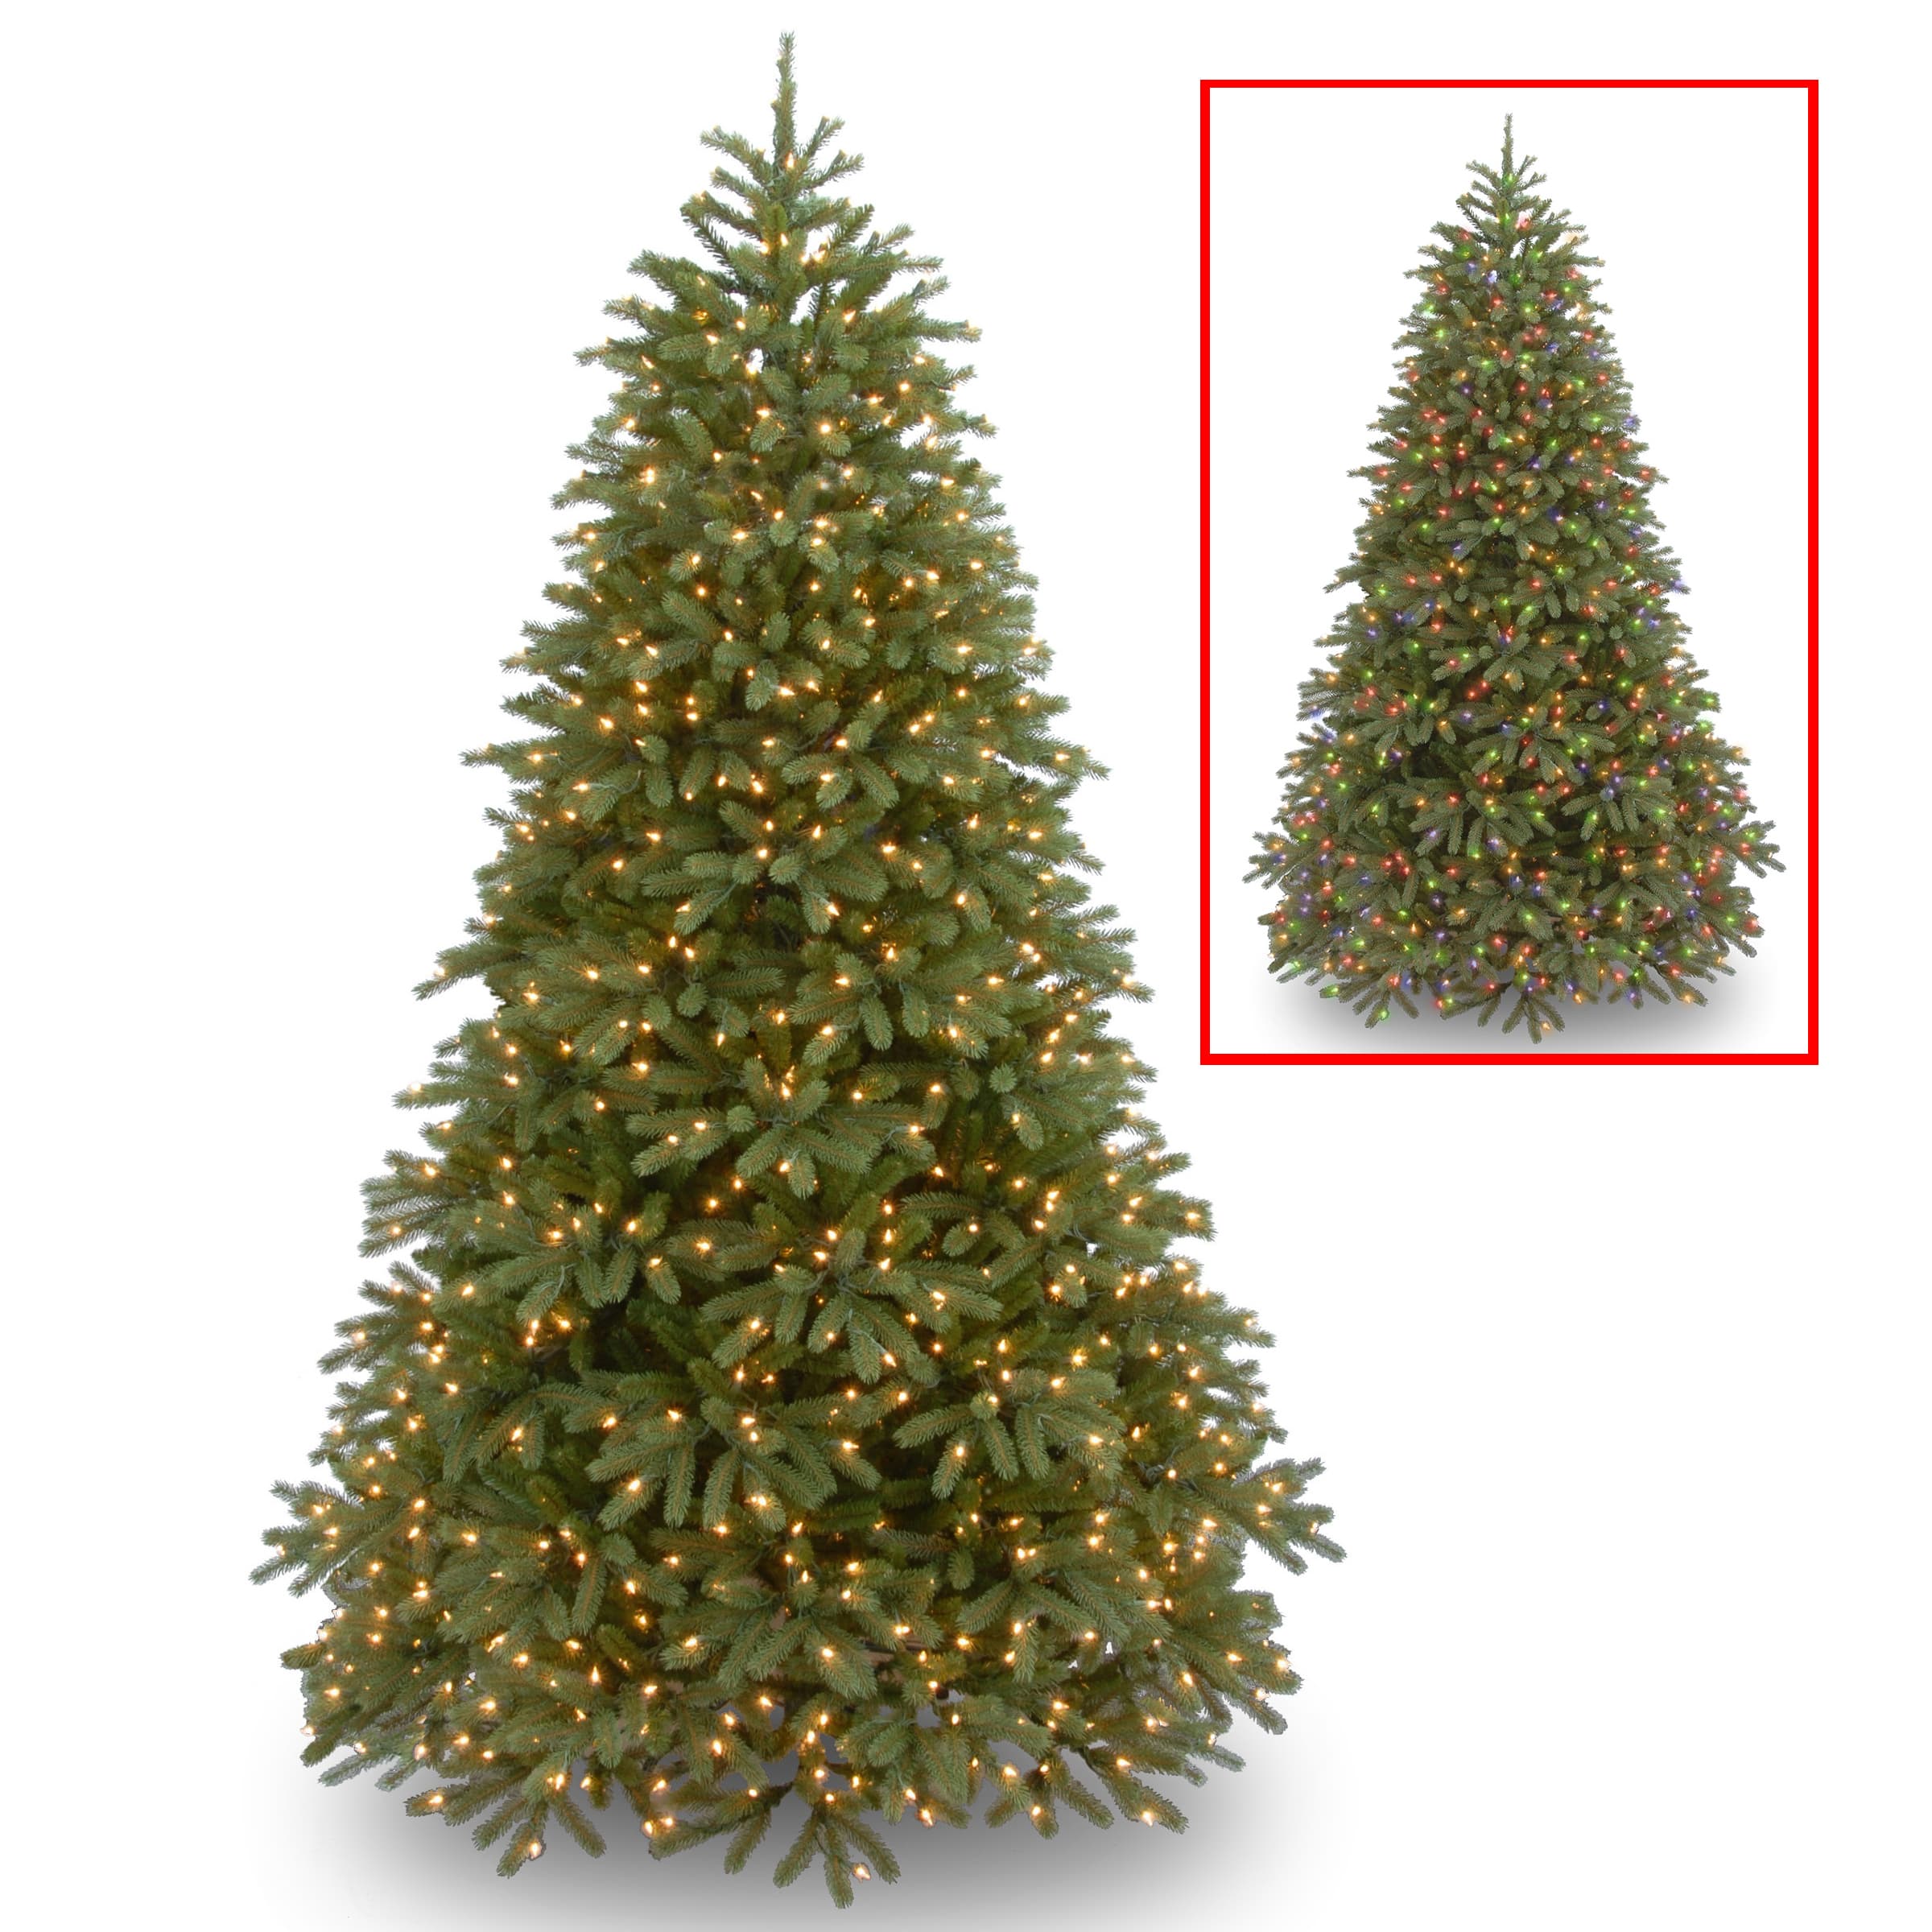 AIRWAVE 5ft Berry Artificial Christmas Tree Pre Lit 280 LED Lights 696 Tips with Hinged Branches & Metal Stand